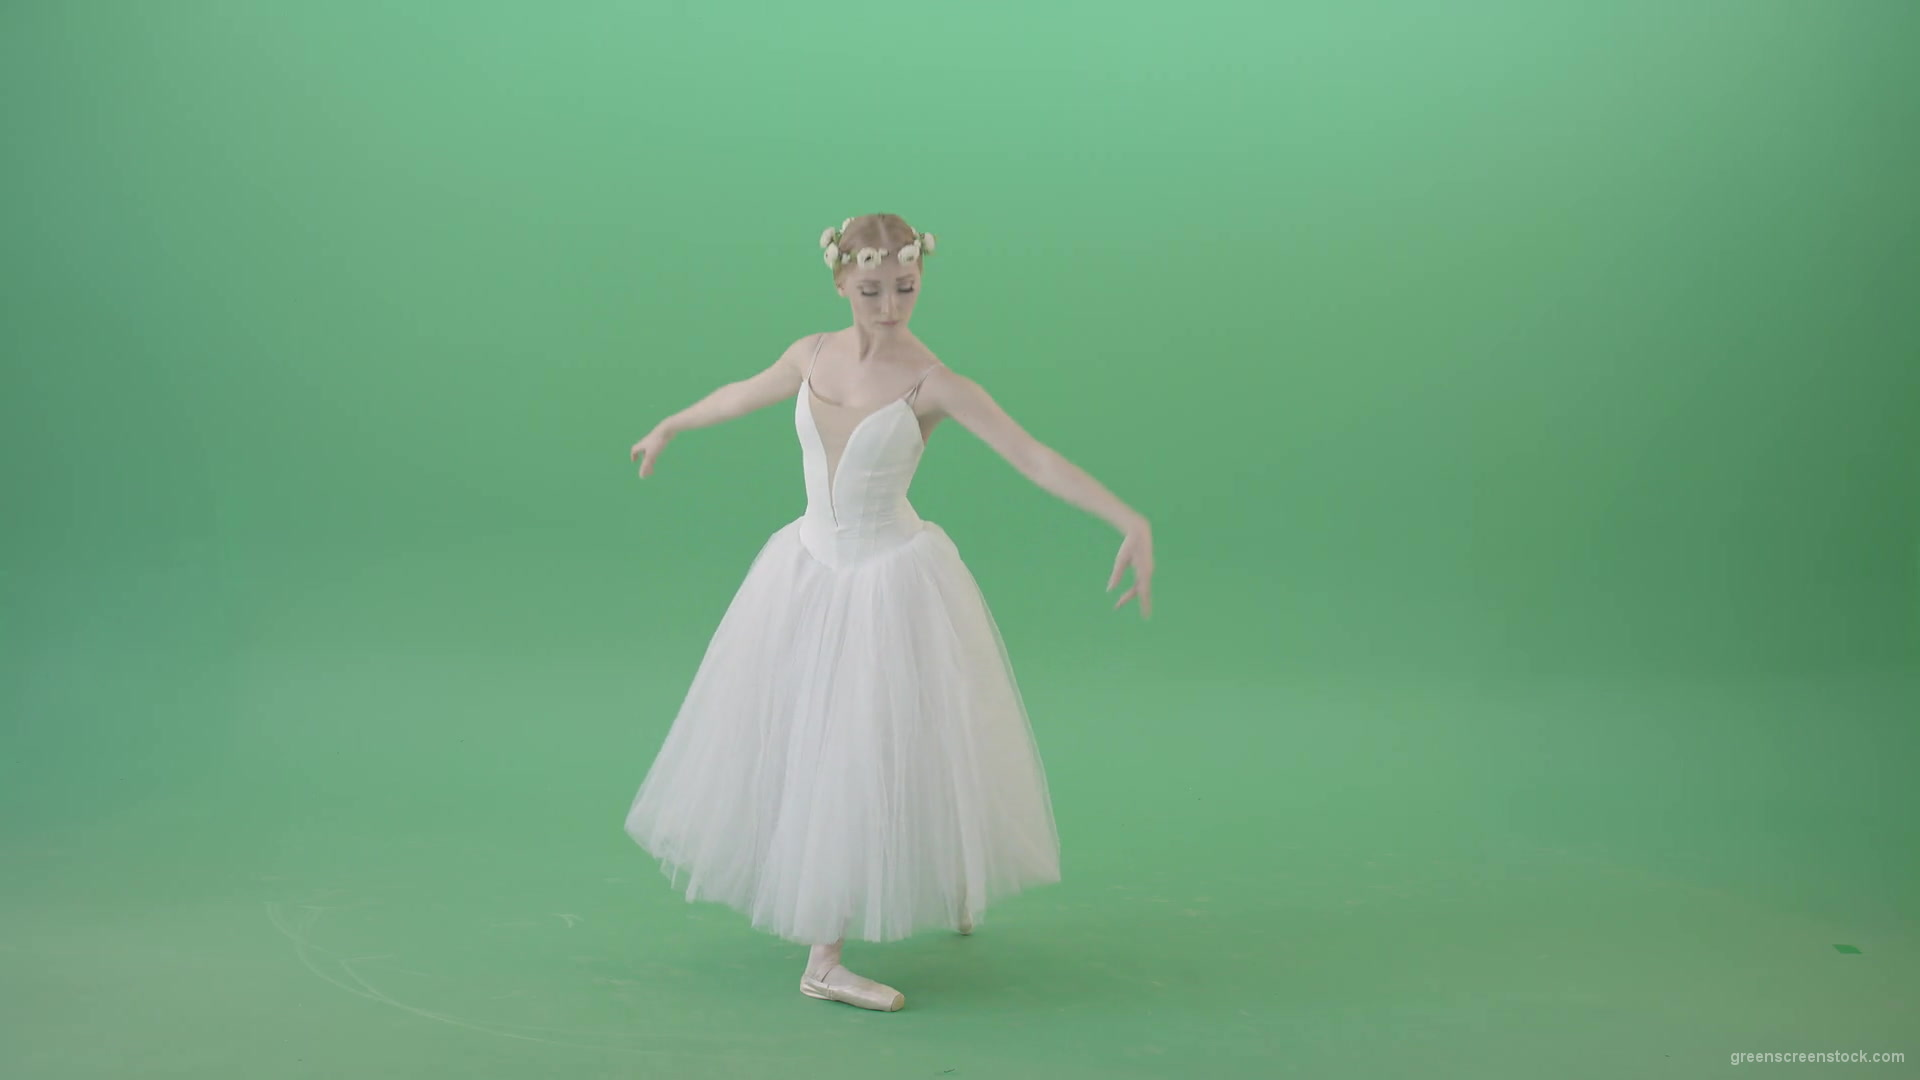 Ballet-Art-Princes-making-royal-regards-in-white-wedding-dress-isolated-on-green-screen-4K-Video-Footage-1920_009 Green Screen Stock